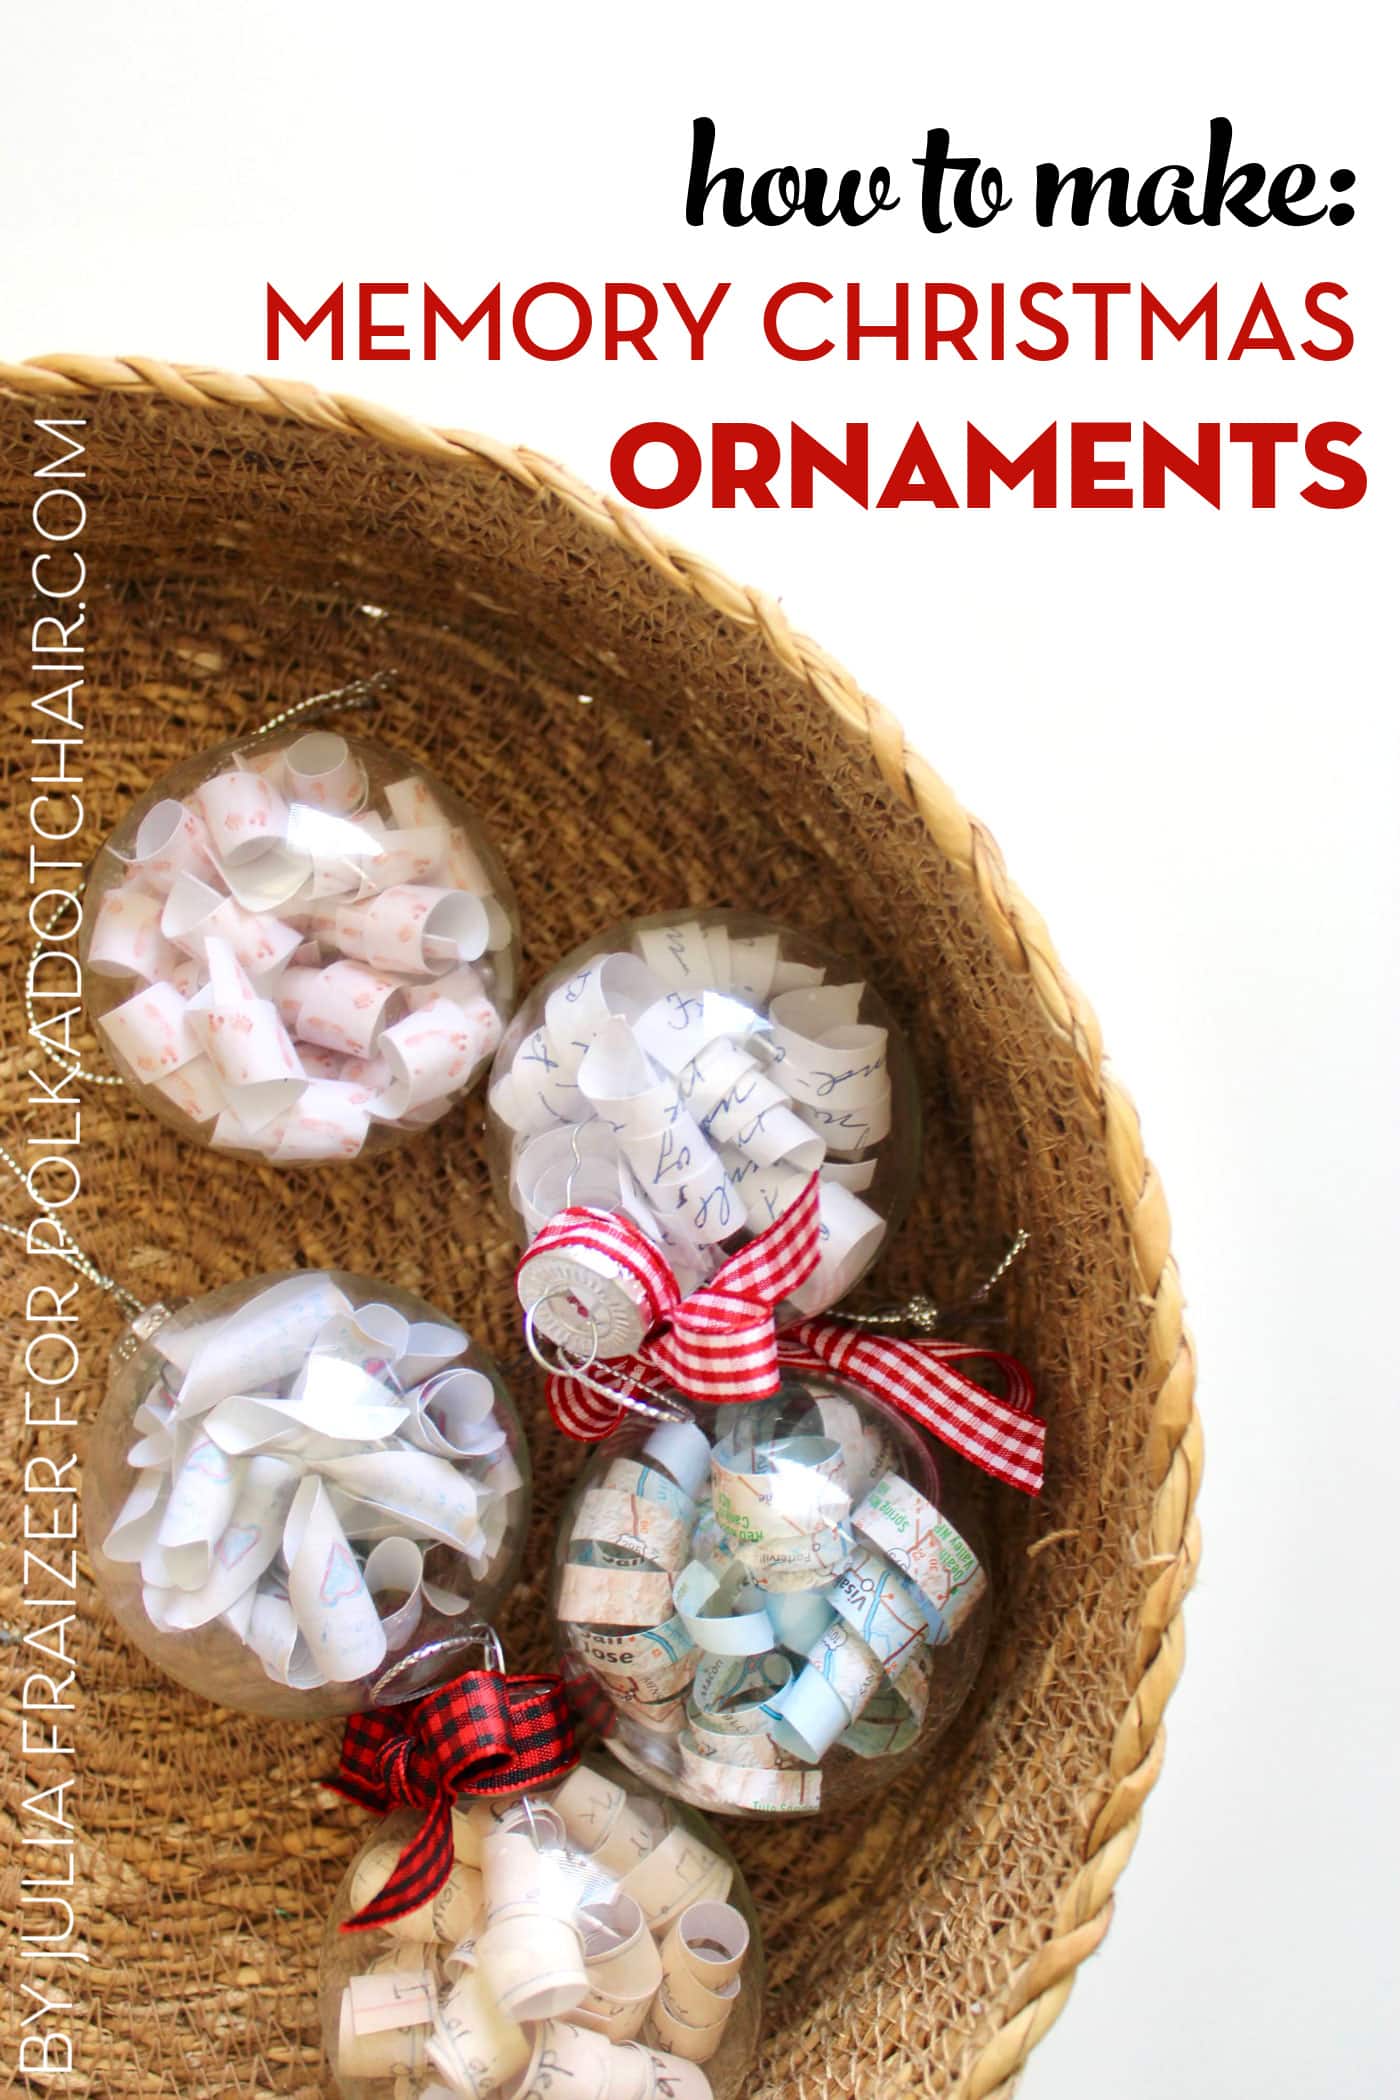 Paper curled clear Christmas ornaments in straw basket